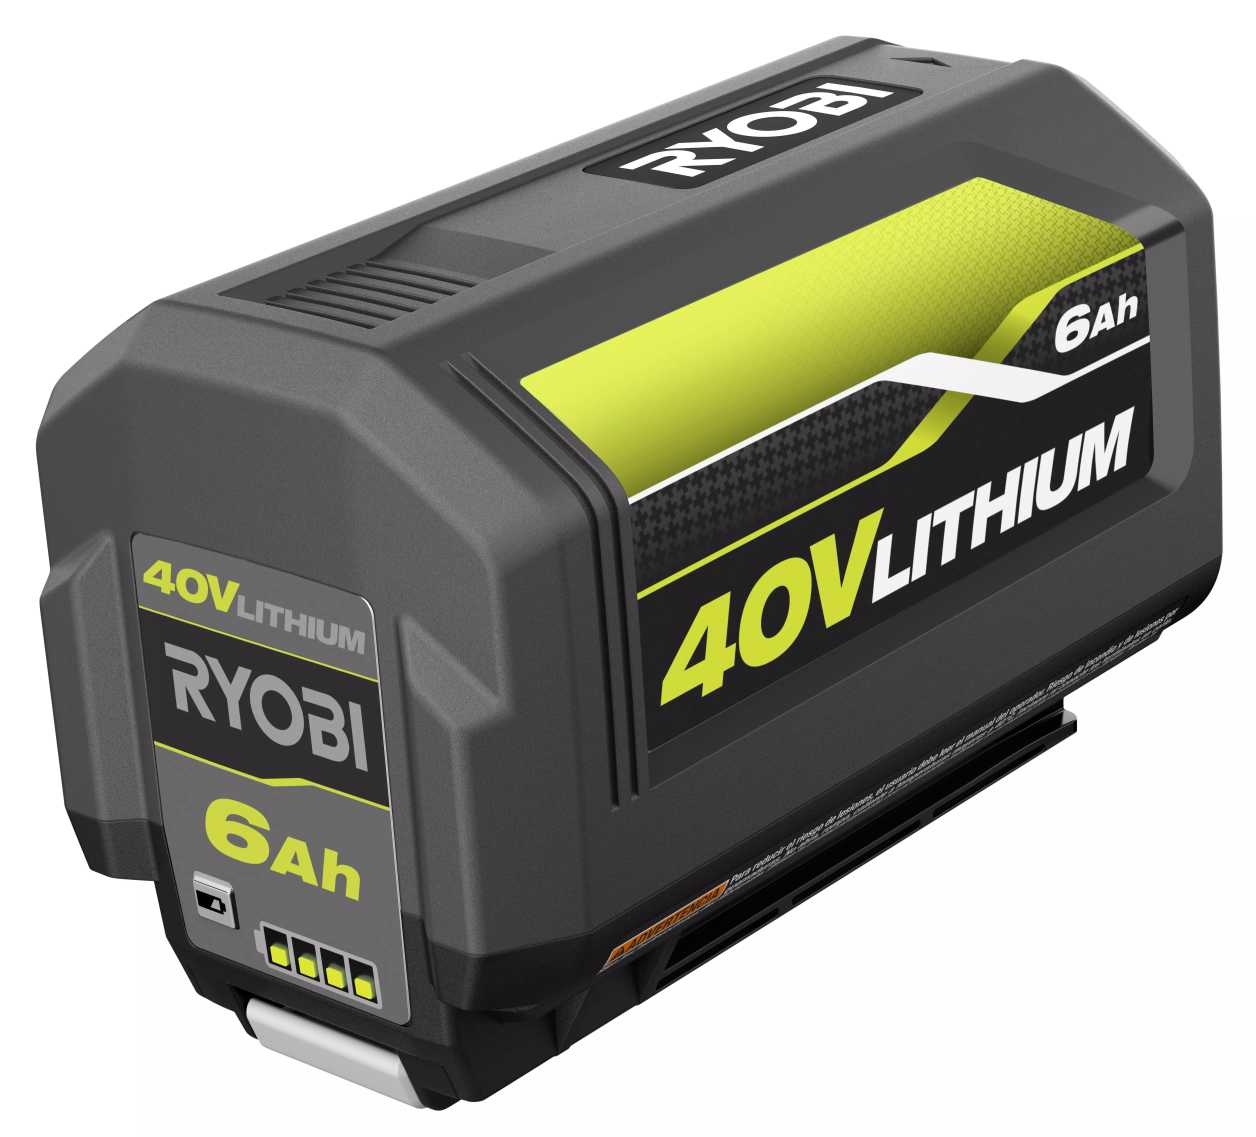 Feature Image for 40V LITHIUM-ION 6.0AH HIGH CAPACITY BATTERY AND RAPID CHARGER KIT.